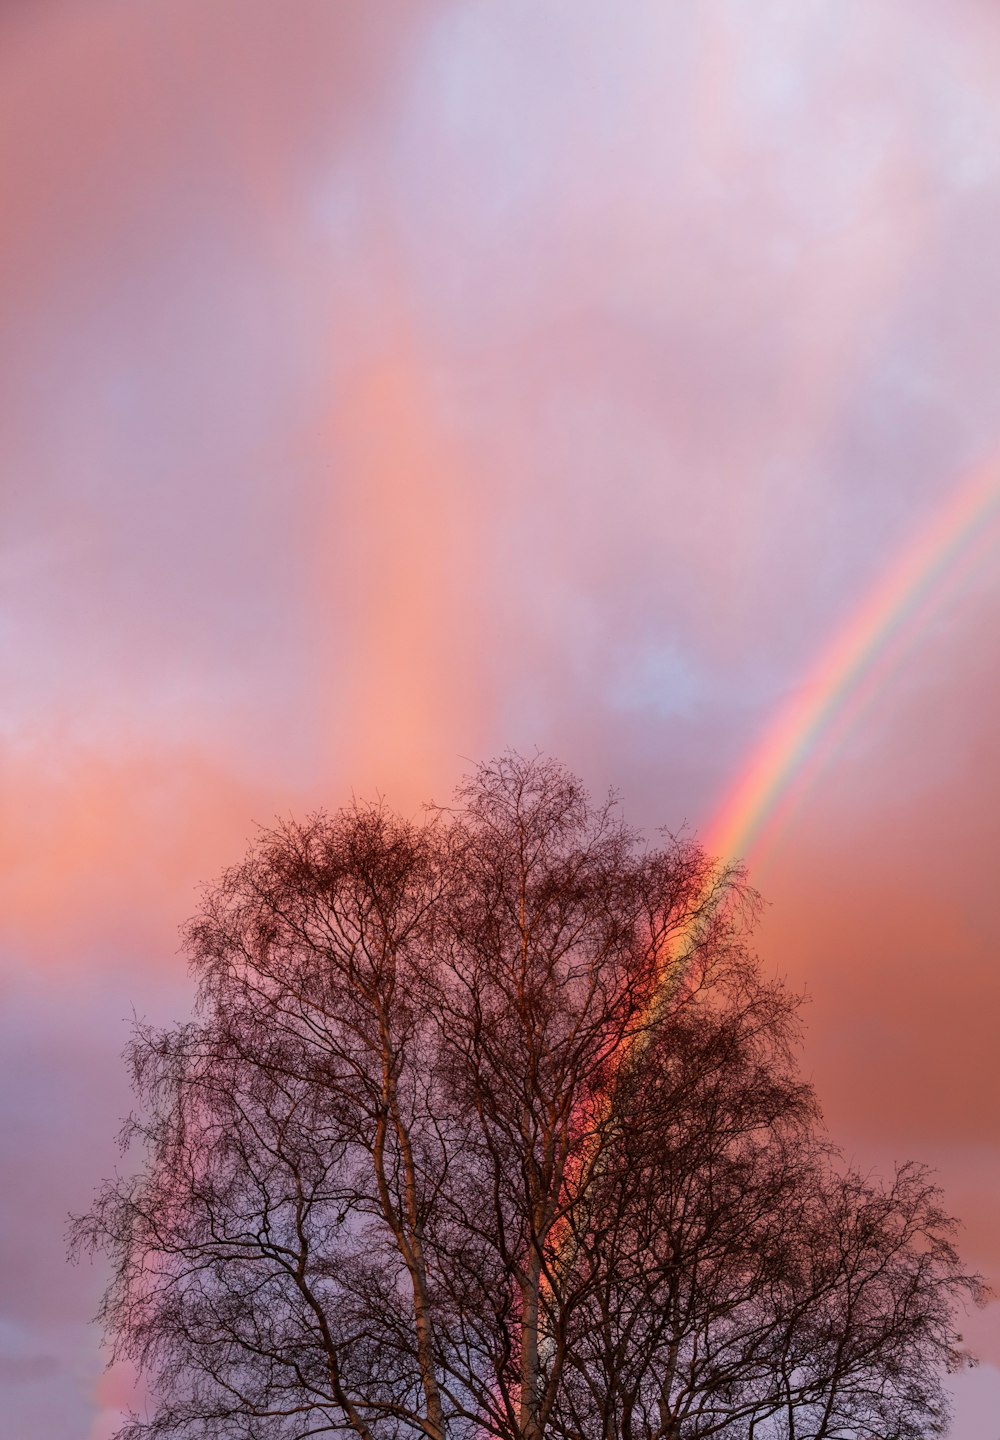 a rainbow appears in the sky above a tree